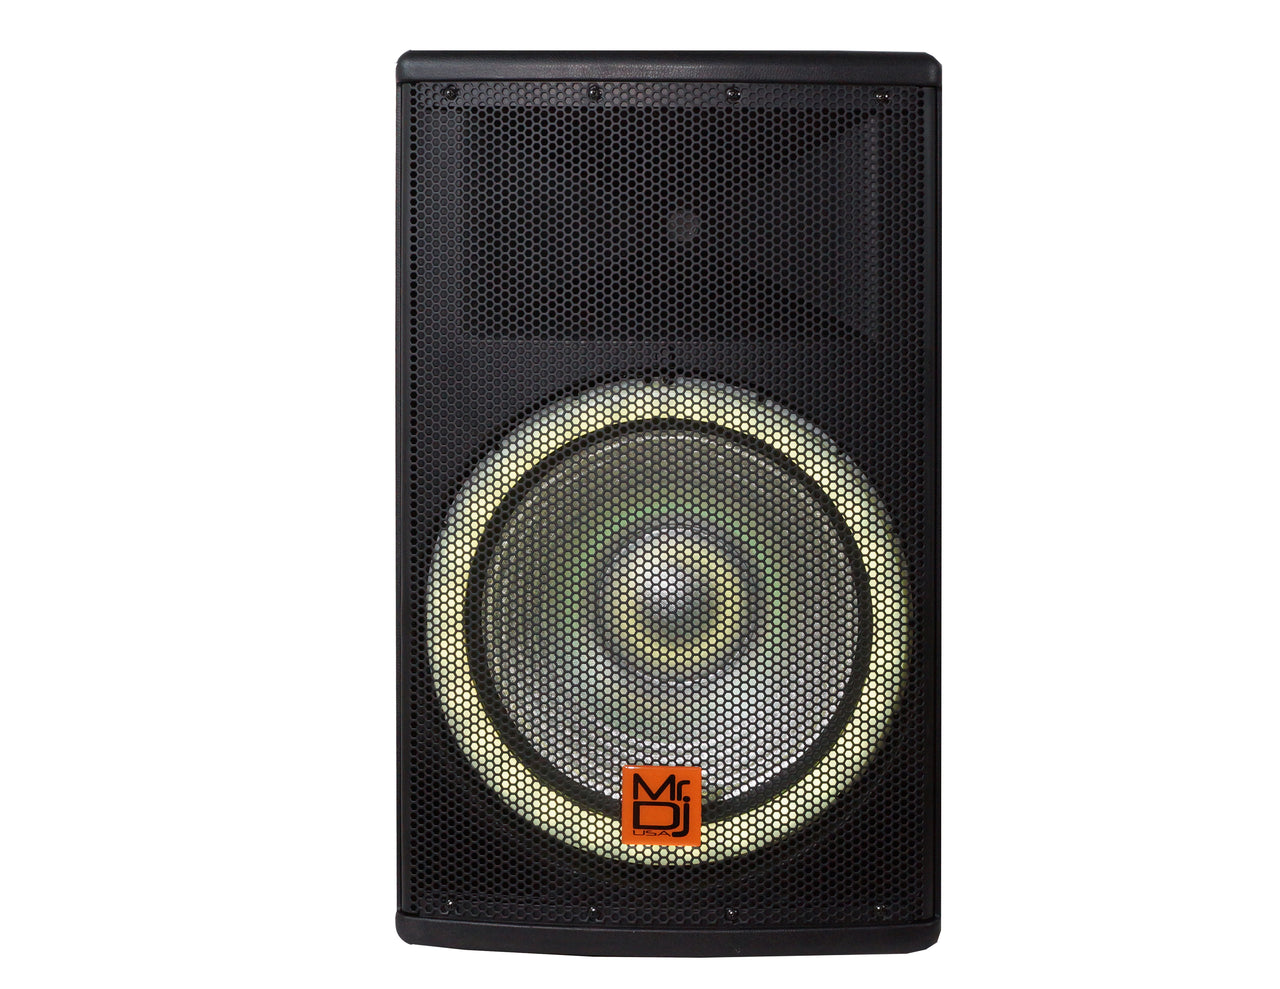 MR DJ SYNERGY15 Pro Audio Indoor Outdoor Ultra Powerful DJ Bluetooth 4500W Watts Peak, 15" Inch Woofer, Rollable Trolley Speaker with Built in Media Player, FM Radio Tuner, USB, SD Card